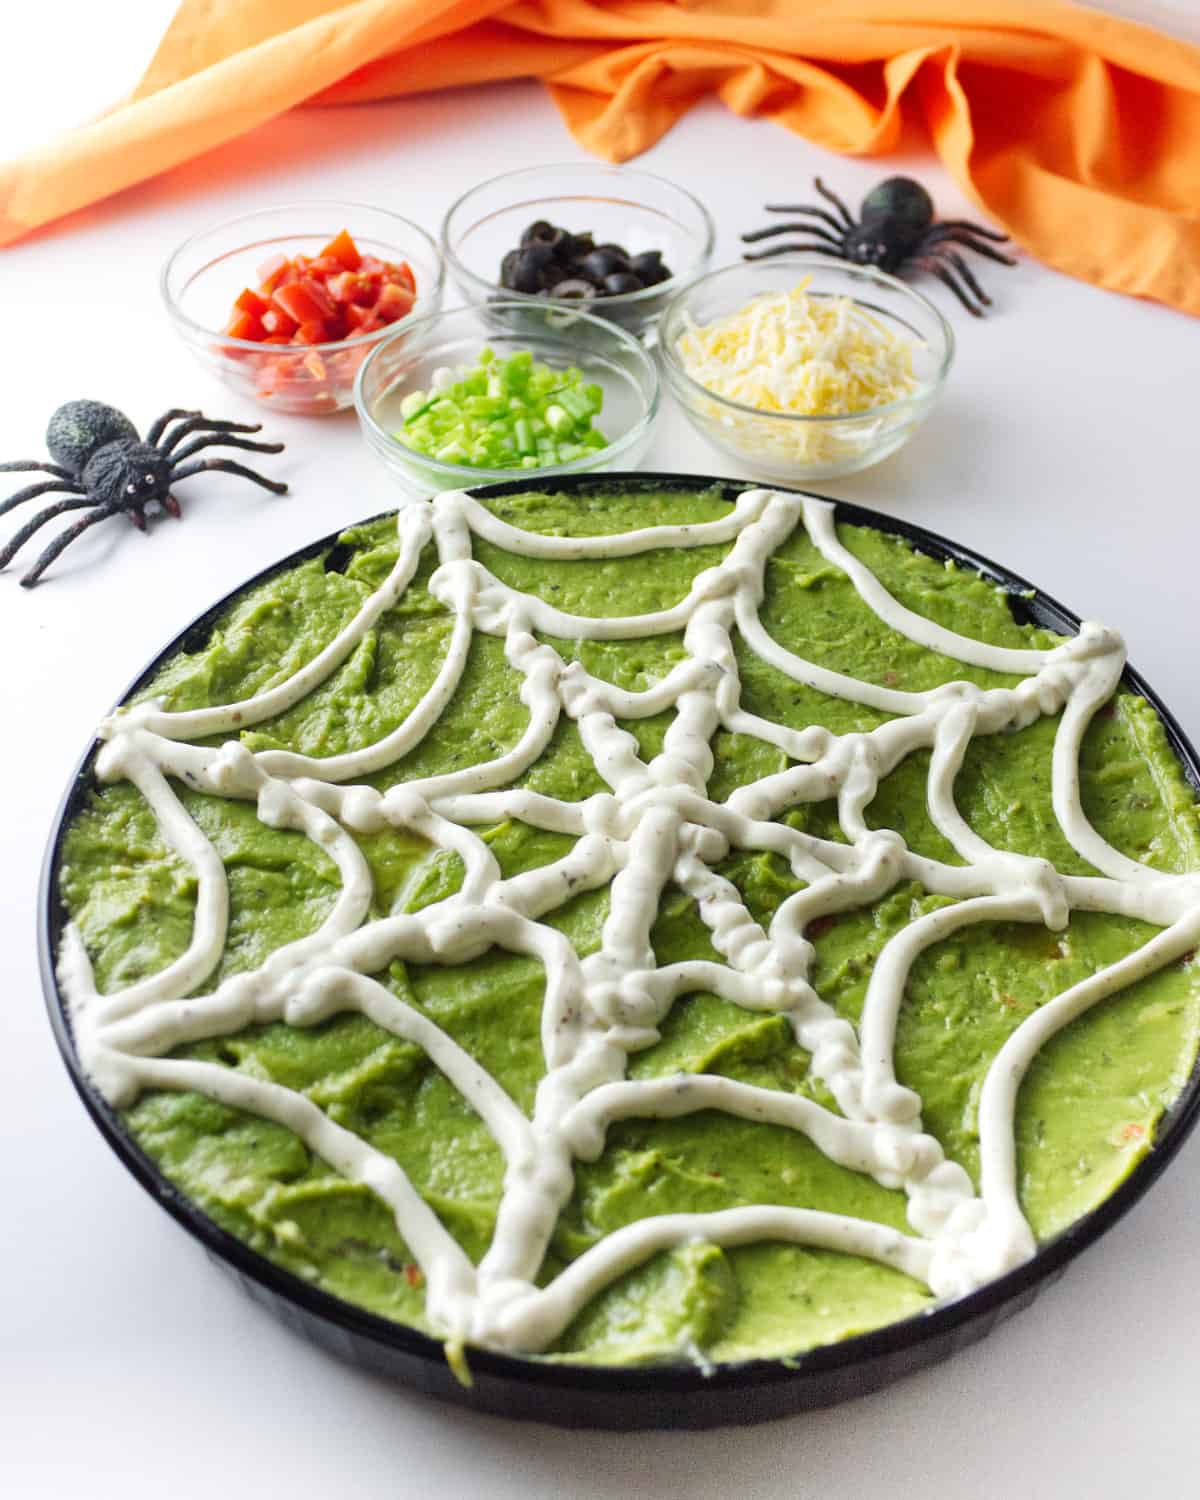 sour cream piped to look like a spider web in a dish.